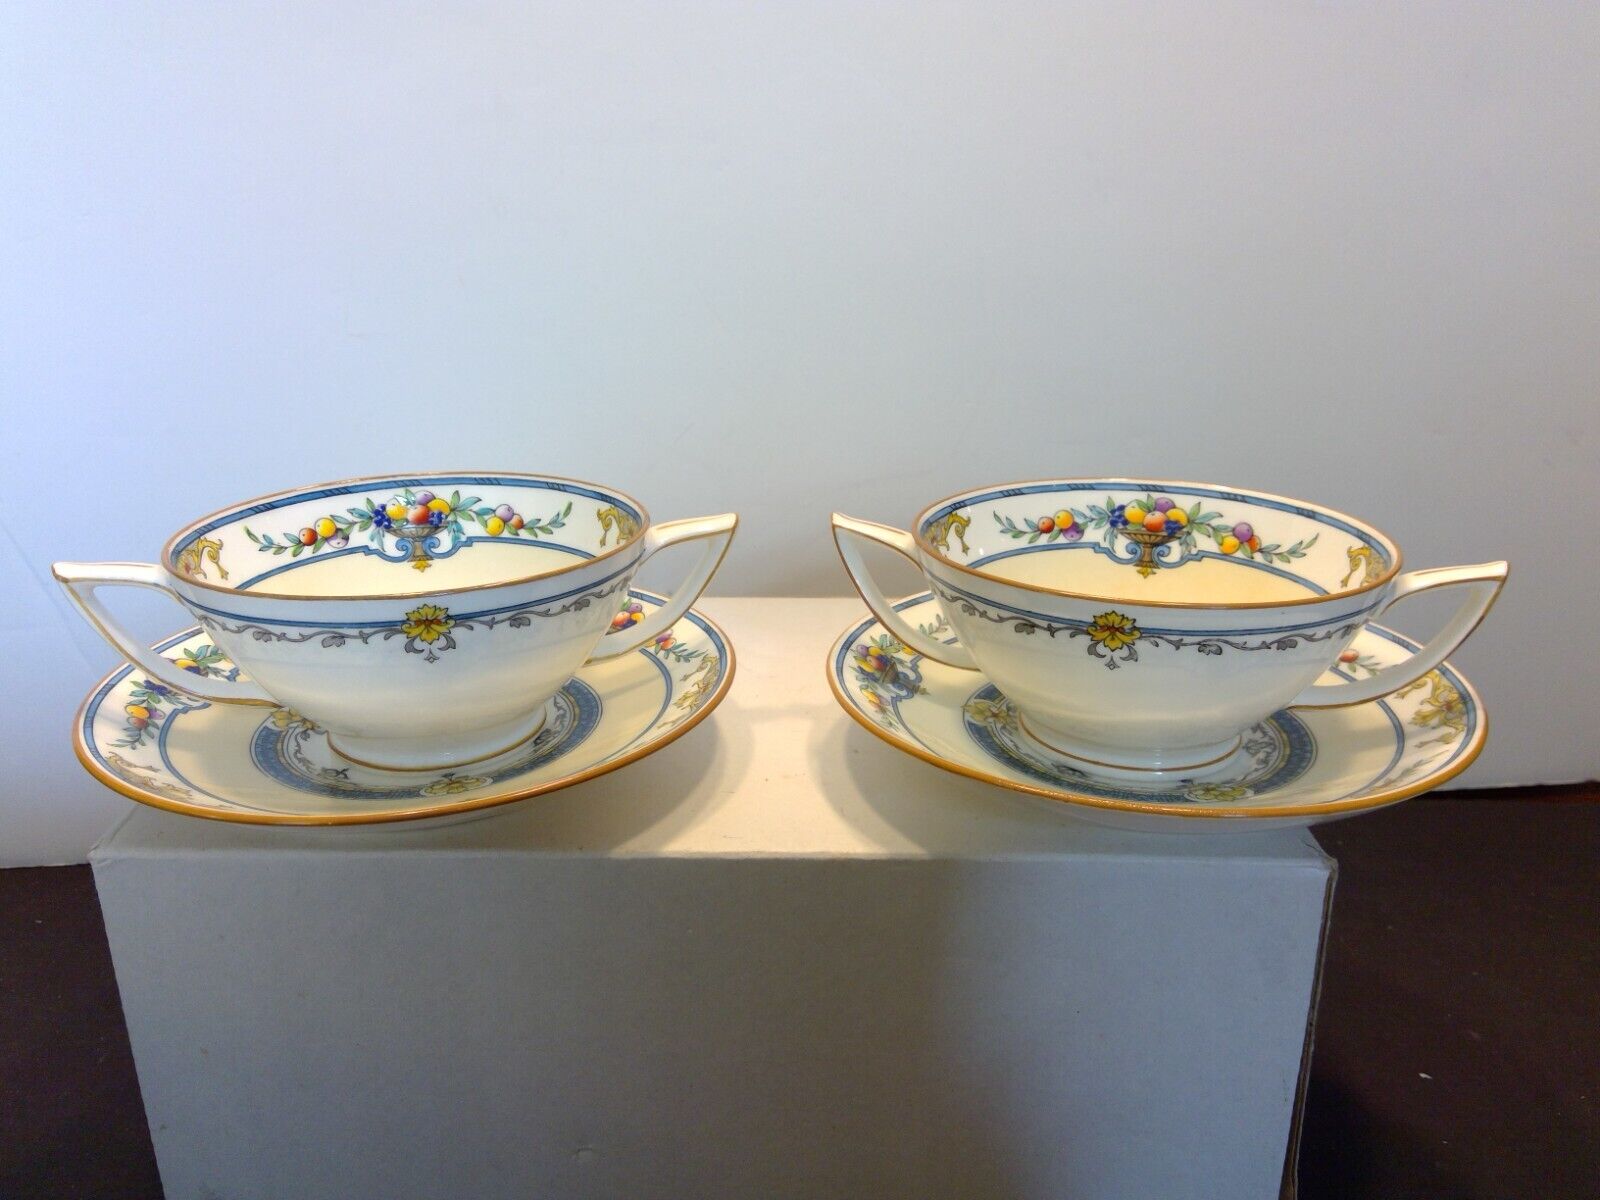 Pair of Antique Minton China Enameled Fruit & Leaves Cream Soup & Saucer Sets